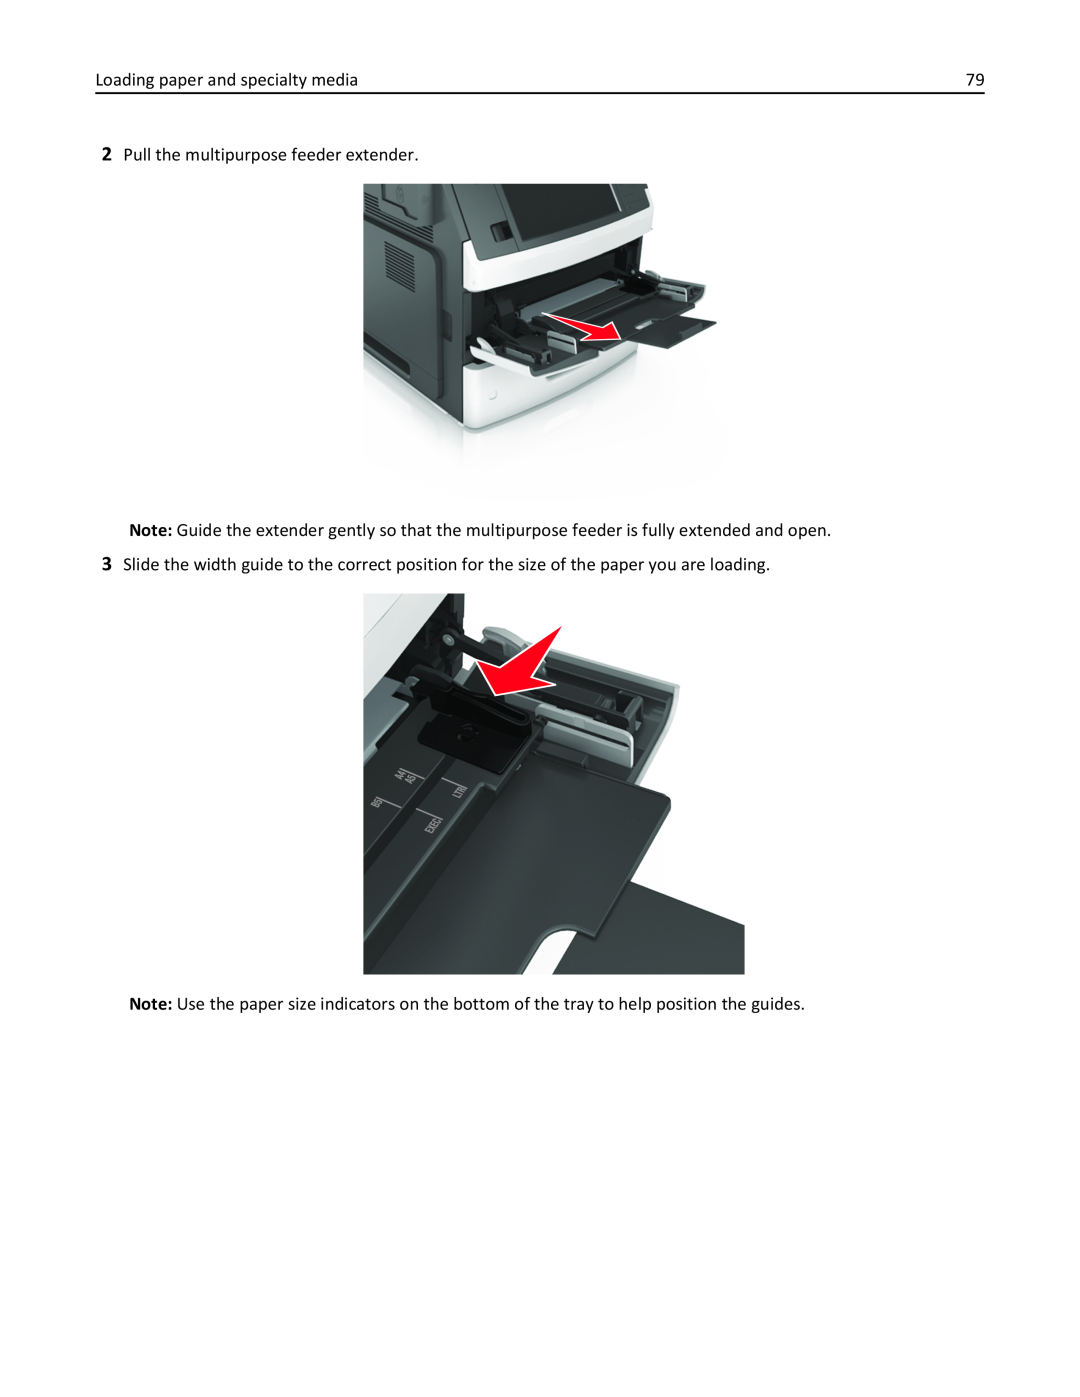 Lexmark 037, MX710DHE, 24T7310, 237 manual Loading paper and specialty media, Pull the multipurpose feeder extender 